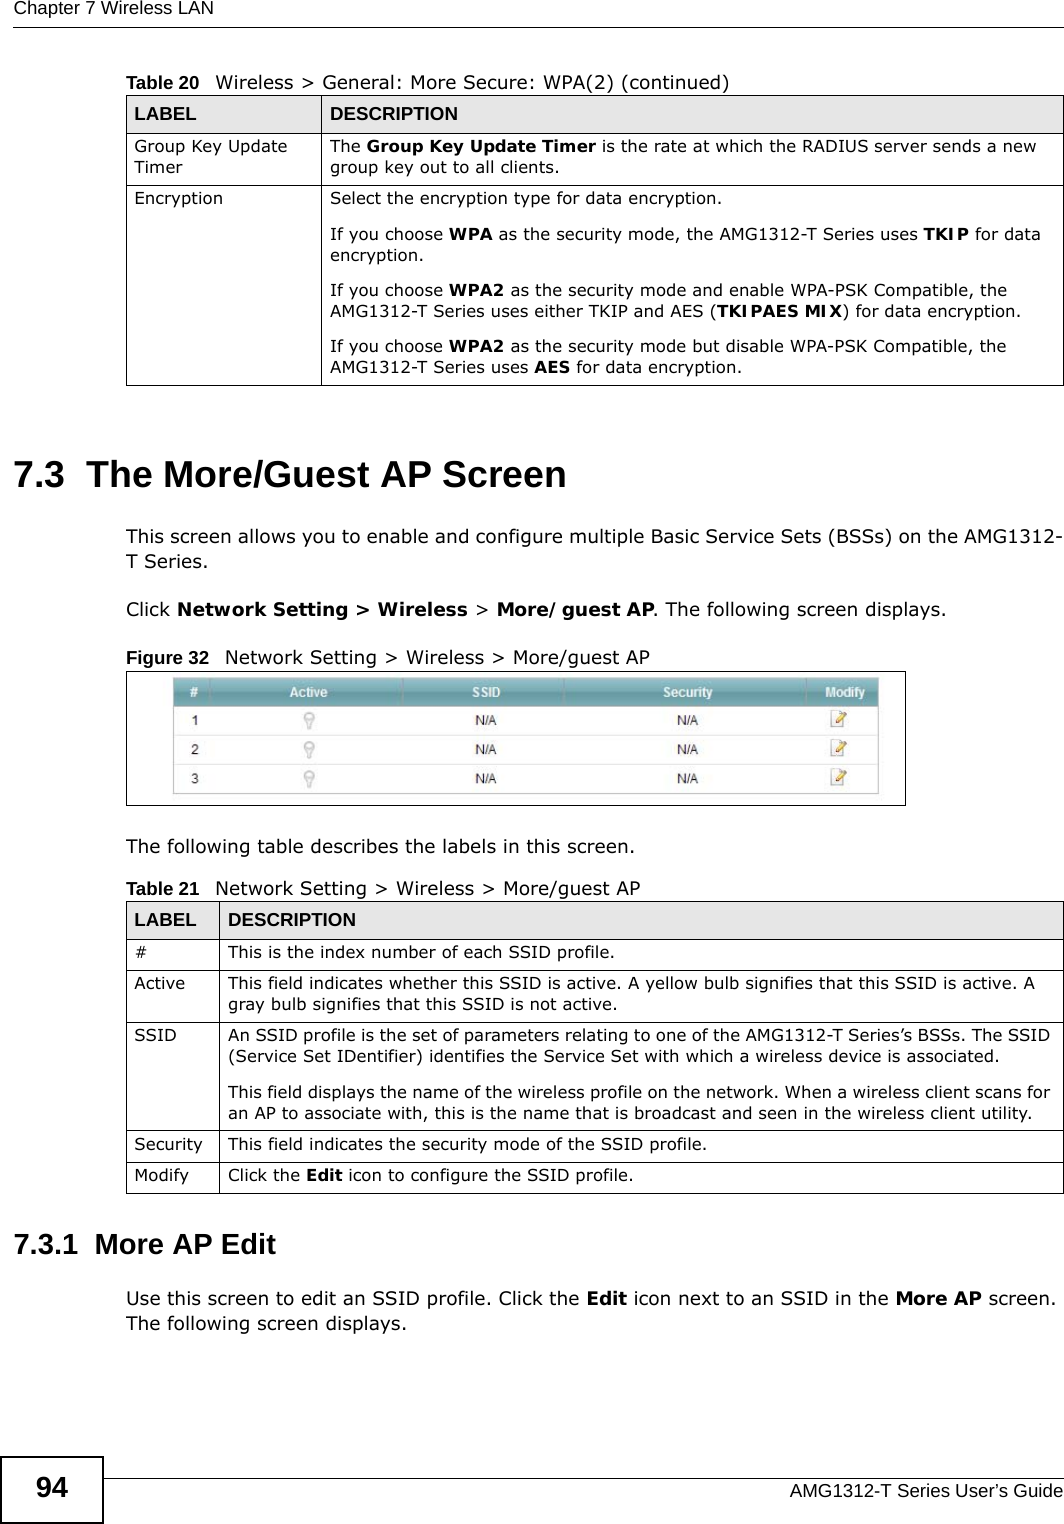 Chapter 7 Wireless LANAMG1312-T Series User’s Guide947.3  The More/Guest AP ScreenThis screen allows you to enable and configure multiple Basic Service Sets (BSSs) on the AMG1312-T Series.Click Network Setting &gt; Wireless &gt; More/guest AP. The following screen displays.Figure 32   Network Setting &gt; Wireless &gt; More/guest APThe following table describes the labels in this screen.7.3.1  More AP EditUse this screen to edit an SSID profile. Click the Edit icon next to an SSID in the More AP screen. The following screen displays.Group Key Update TimerThe Group Key Update Timer is the rate at which the RADIUS server sends a new group key out to all clients. Encryption Select the encryption type for data encryption.If you choose WPA as the security mode, the AMG1312-T Series uses TKIP for data encryption.If you choose WPA2 as the security mode and enable WPA-PSK Compatible, the AMG1312-T Series uses either TKIP and AES (TKIPAES MIX) for data encryption.If you choose WPA2 as the security mode but disable WPA-PSK Compatible, the AMG1312-T Series uses AES for data encryption.Table 20   Wireless &gt; General: More Secure: WPA(2) (continued)LABEL DESCRIPTIONTable 21   Network Setting &gt; Wireless &gt; More/guest APLABEL DESCRIPTION# This is the index number of each SSID profile. Active This field indicates whether this SSID is active. A yellow bulb signifies that this SSID is active. A gray bulb signifies that this SSID is not active.SSID An SSID profile is the set of parameters relating to one of the AMG1312-T Series’s BSSs. The SSID (Service Set IDentifier) identifies the Service Set with which a wireless device is associated. This field displays the name of the wireless profile on the network. When a wireless client scans for an AP to associate with, this is the name that is broadcast and seen in the wireless client utility.Security This field indicates the security mode of the SSID profile.Modify Click the Edit icon to configure the SSID profile.